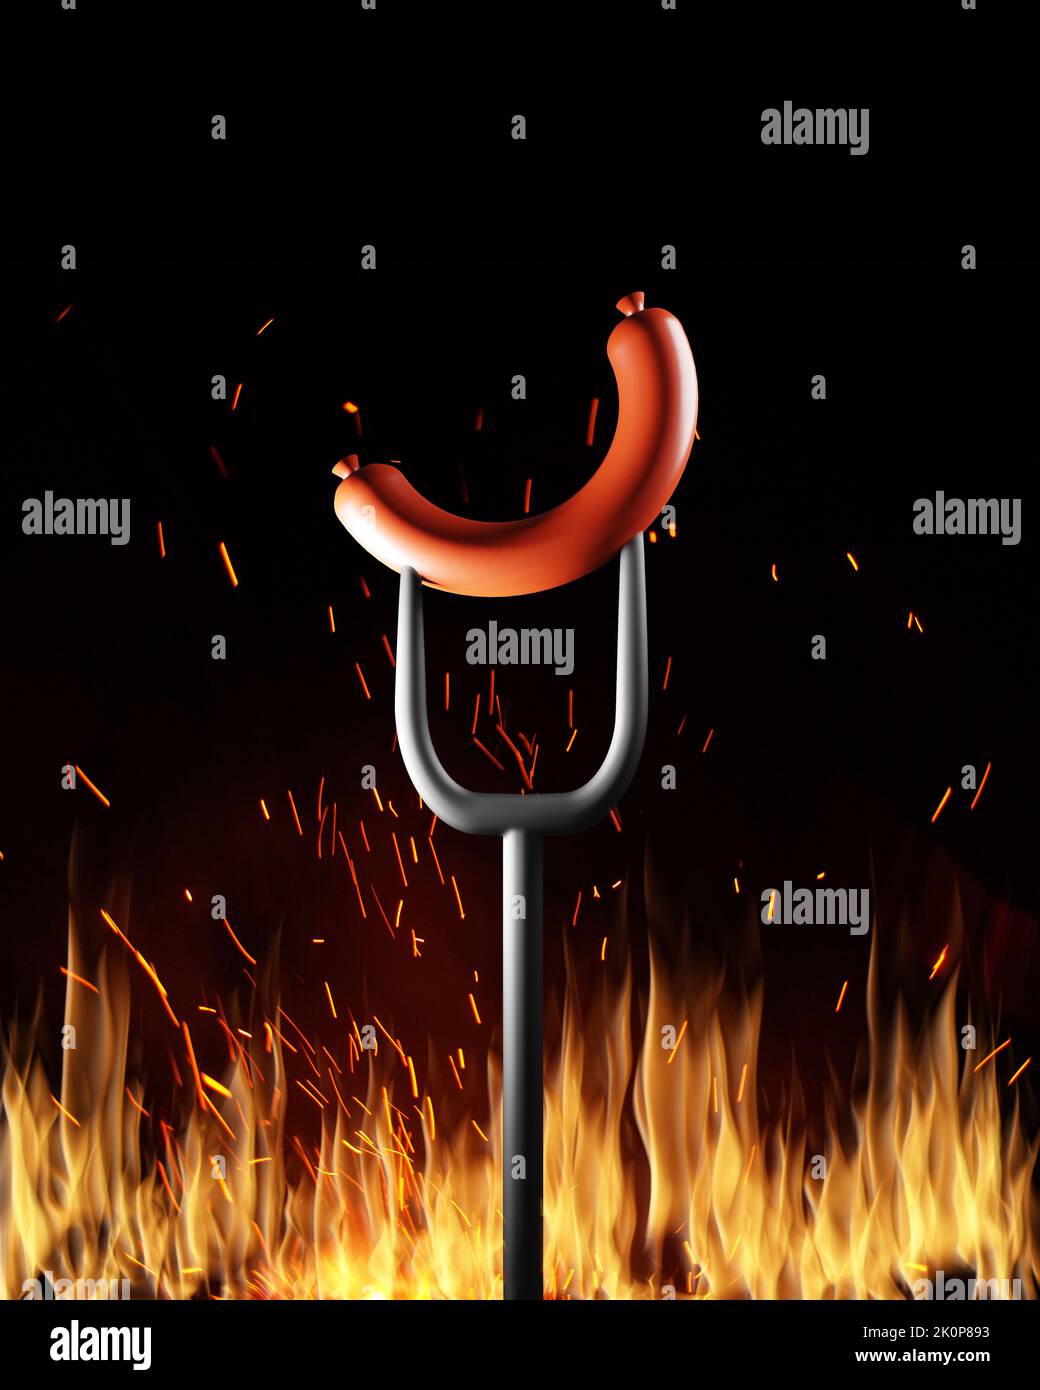 Grill or barbecue cookout concept. Bangers sausage on fork over the fire on black background Stock Photo